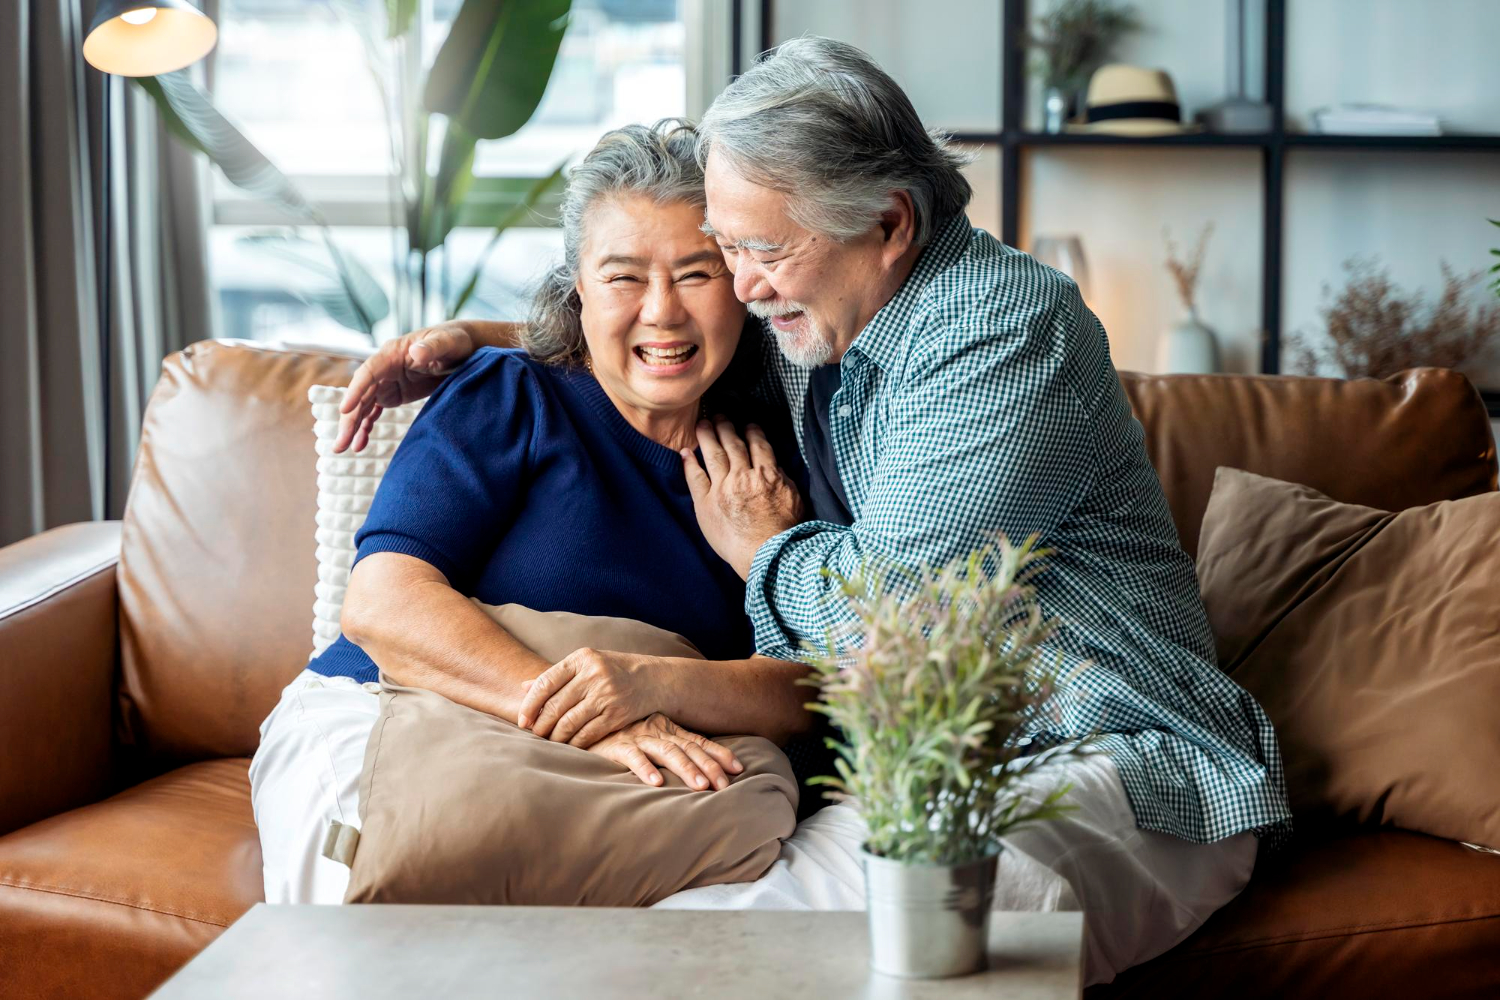 An older couple sits on a brown leather couch, hugging and smiling at the camera.